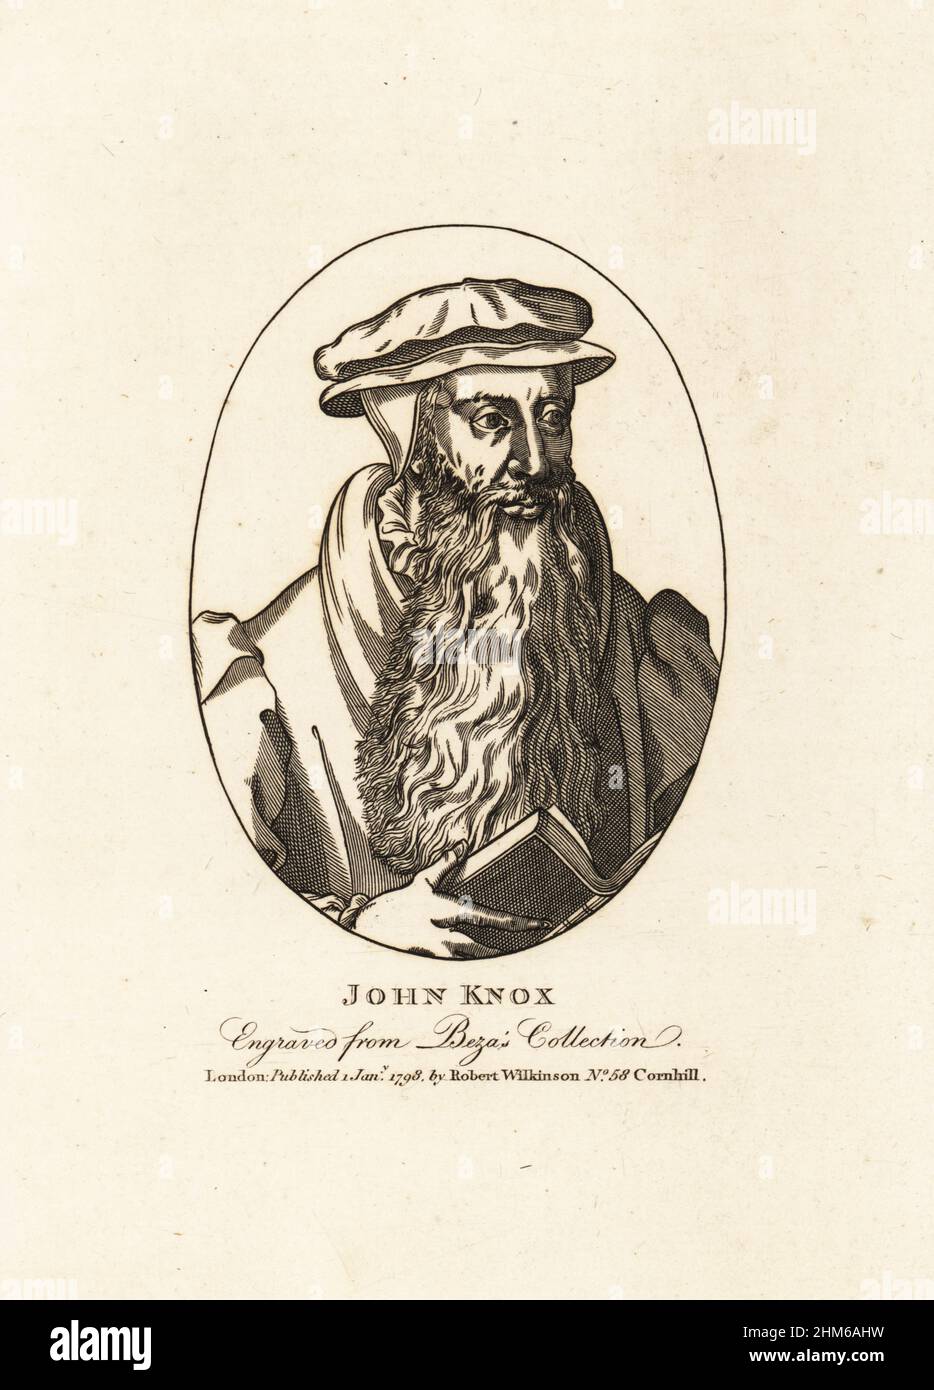 John Knox (1505-1572), Scottish priest, leader of the Protestant Reformation in Scotland. With long beard, cap, hood and coat, holding a Bible. Engraved from Theodore Beza's collection. Copperplate engraving from John Smith’s Iconographia Scotica, or portraits of illustrious persons of Scotland, Robert Wilkinson, 58 Cornhill, London, 1798. Stock Photo